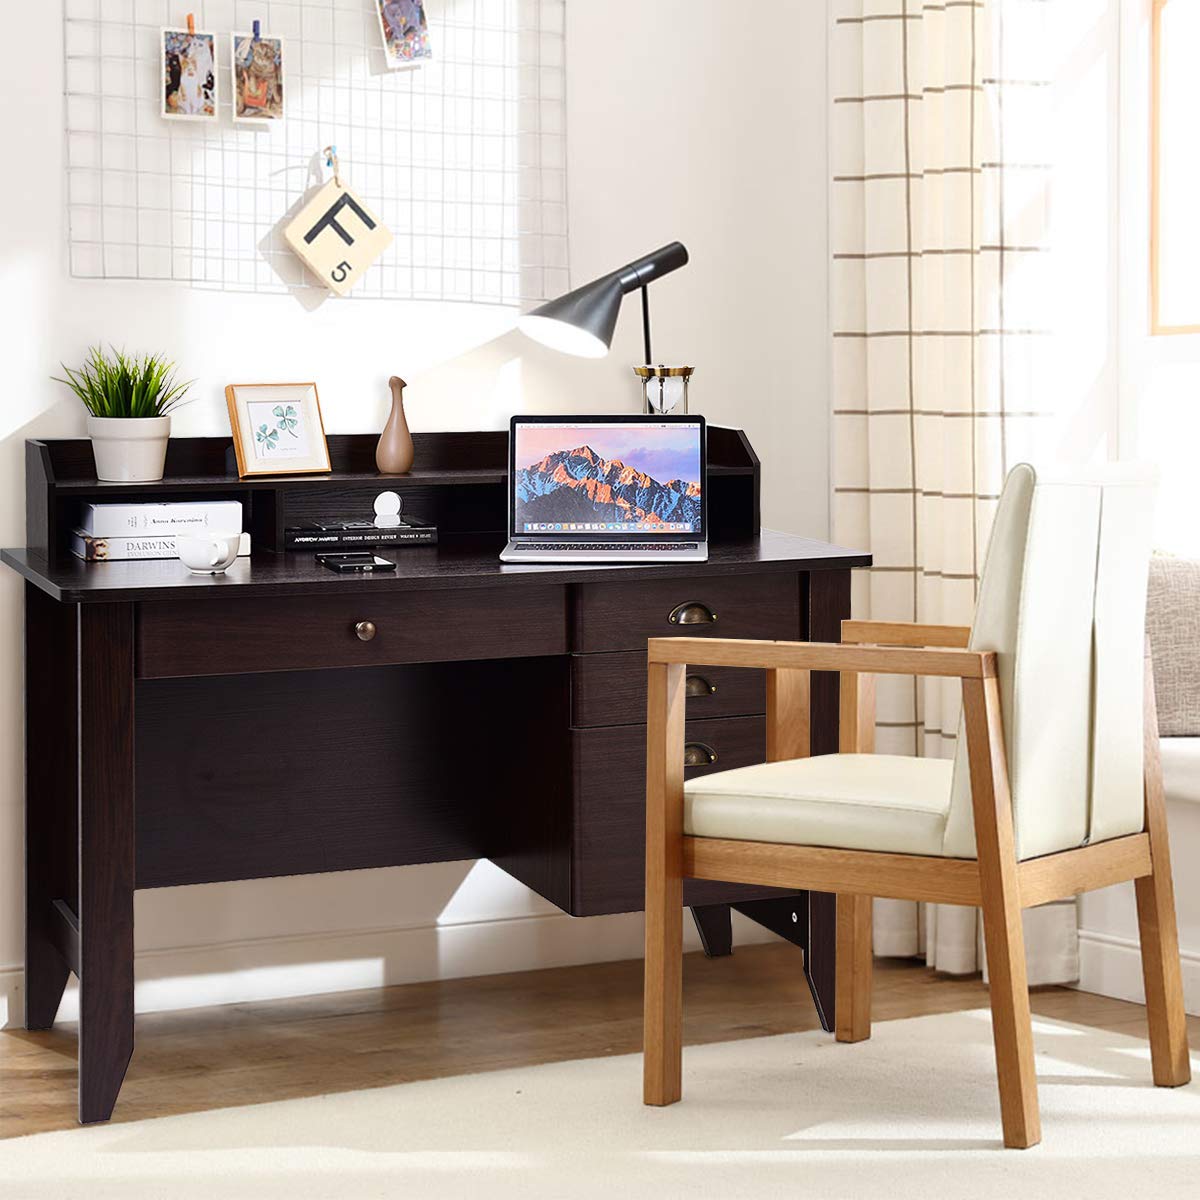 Tangkula Computer Desk with 4 Storage Drawers & Hutch, Home Office Desk Vintage Desk with Storage Shelves, Wooden Executive Desk Writing Study Desk